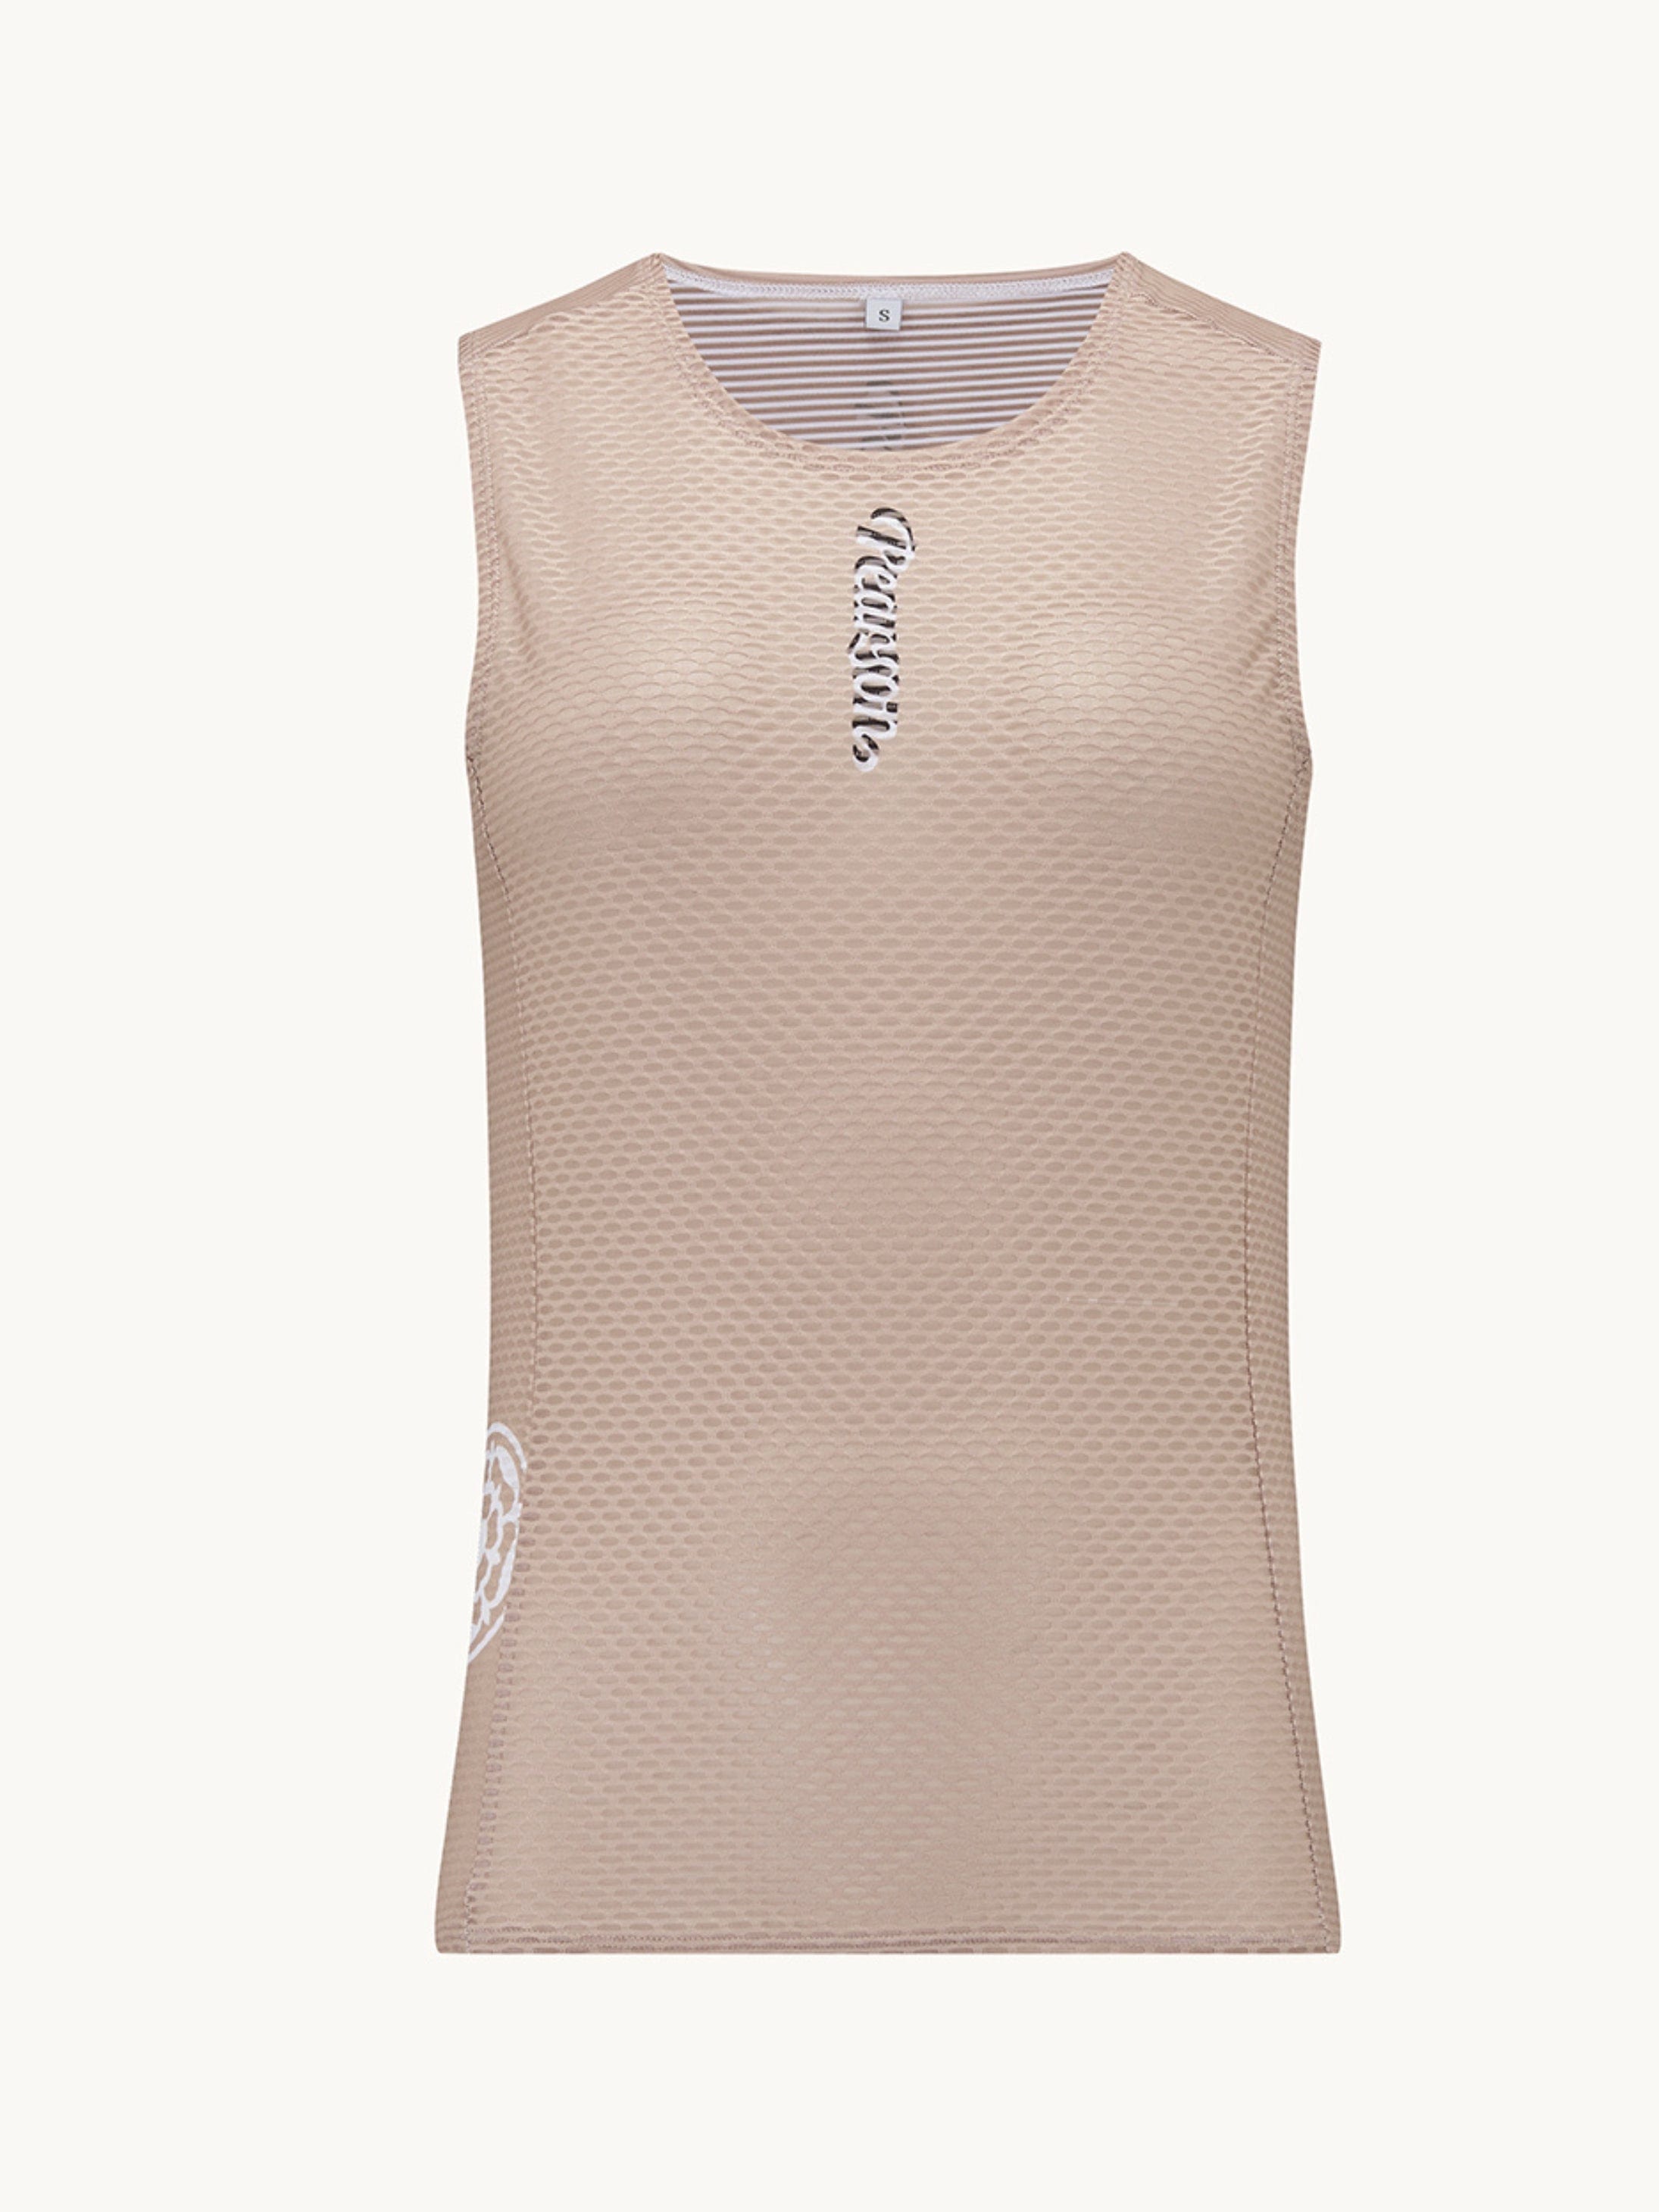 Pearson Cycles Pearson1860, Long Hot Summer - Unisex Sleeveless Base Layer Sand, Sand / L